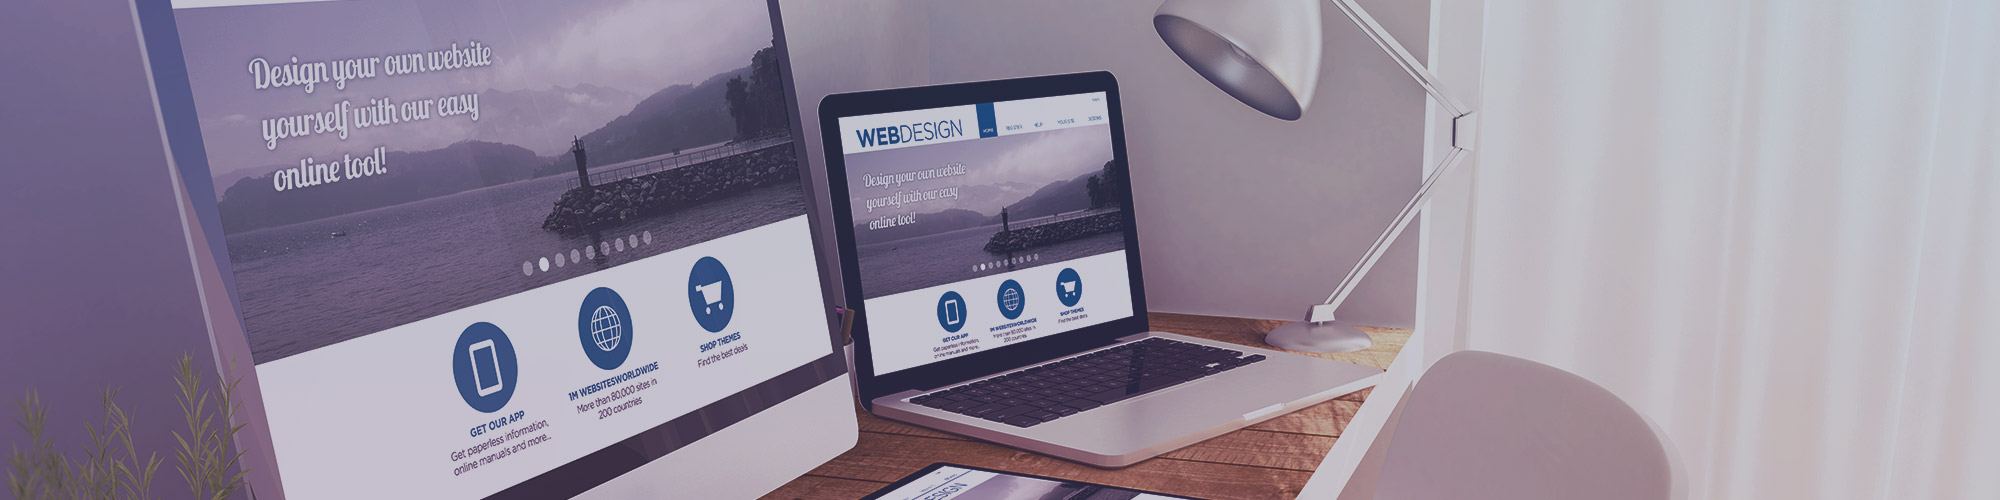 5 Things Every Financial Advisor Should Know About Websites